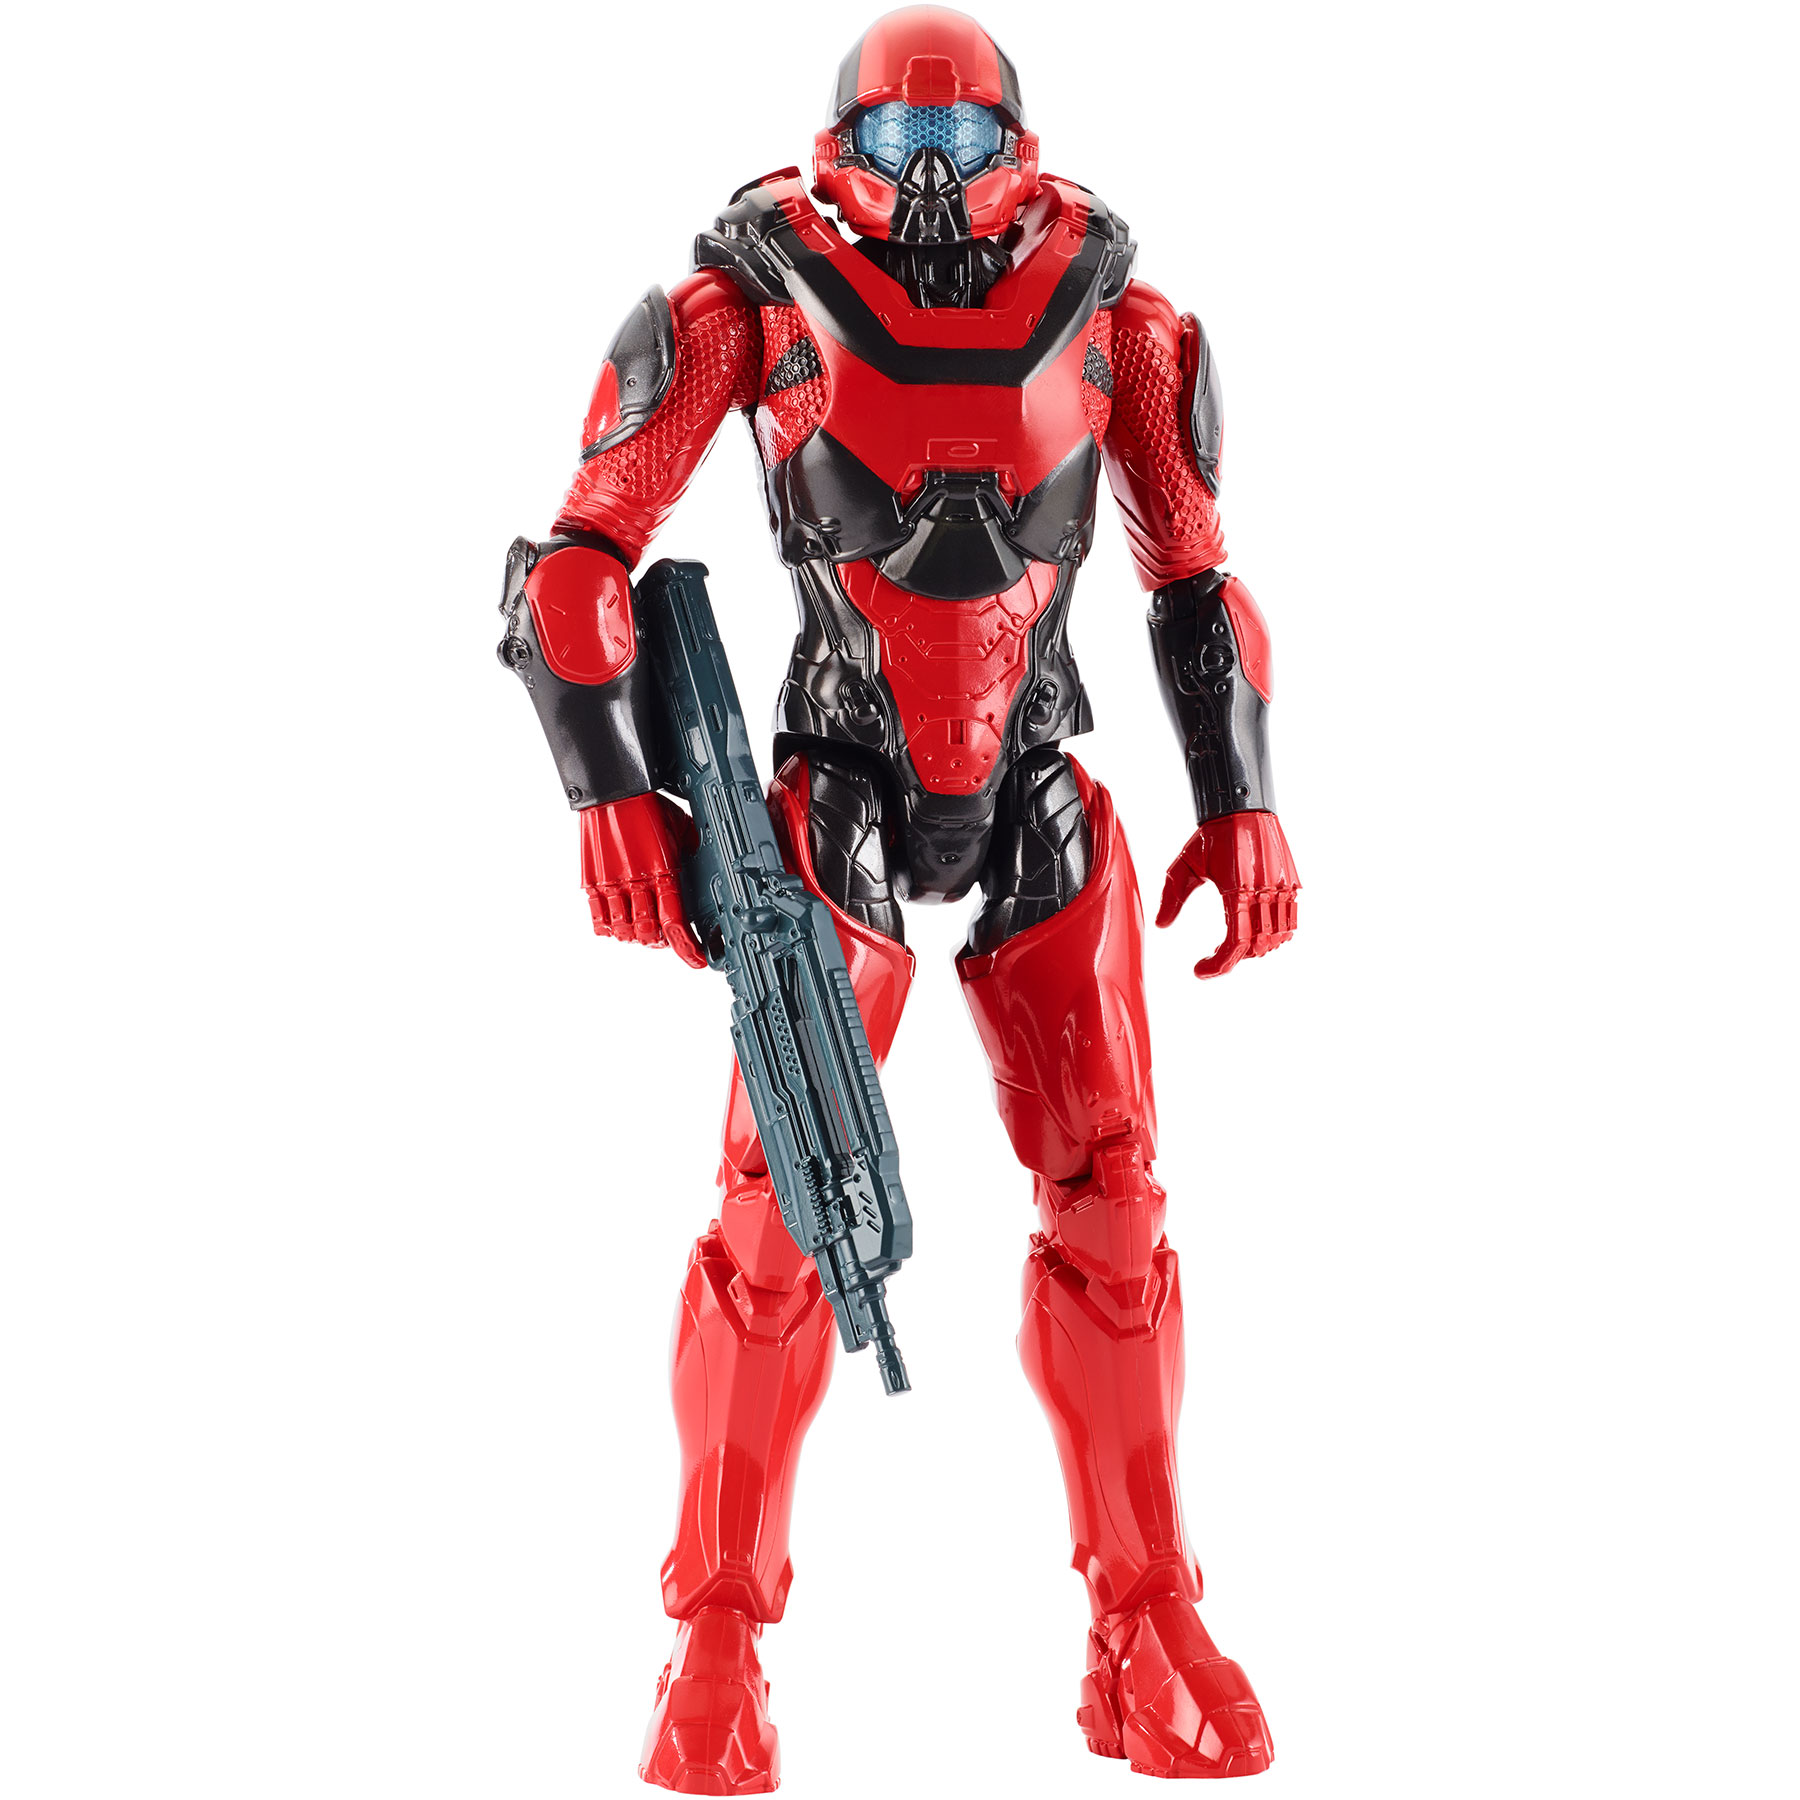 Details about   Halo Spartan Athlon Red Deluxe Action Figure 10" Inch ~ Brand New